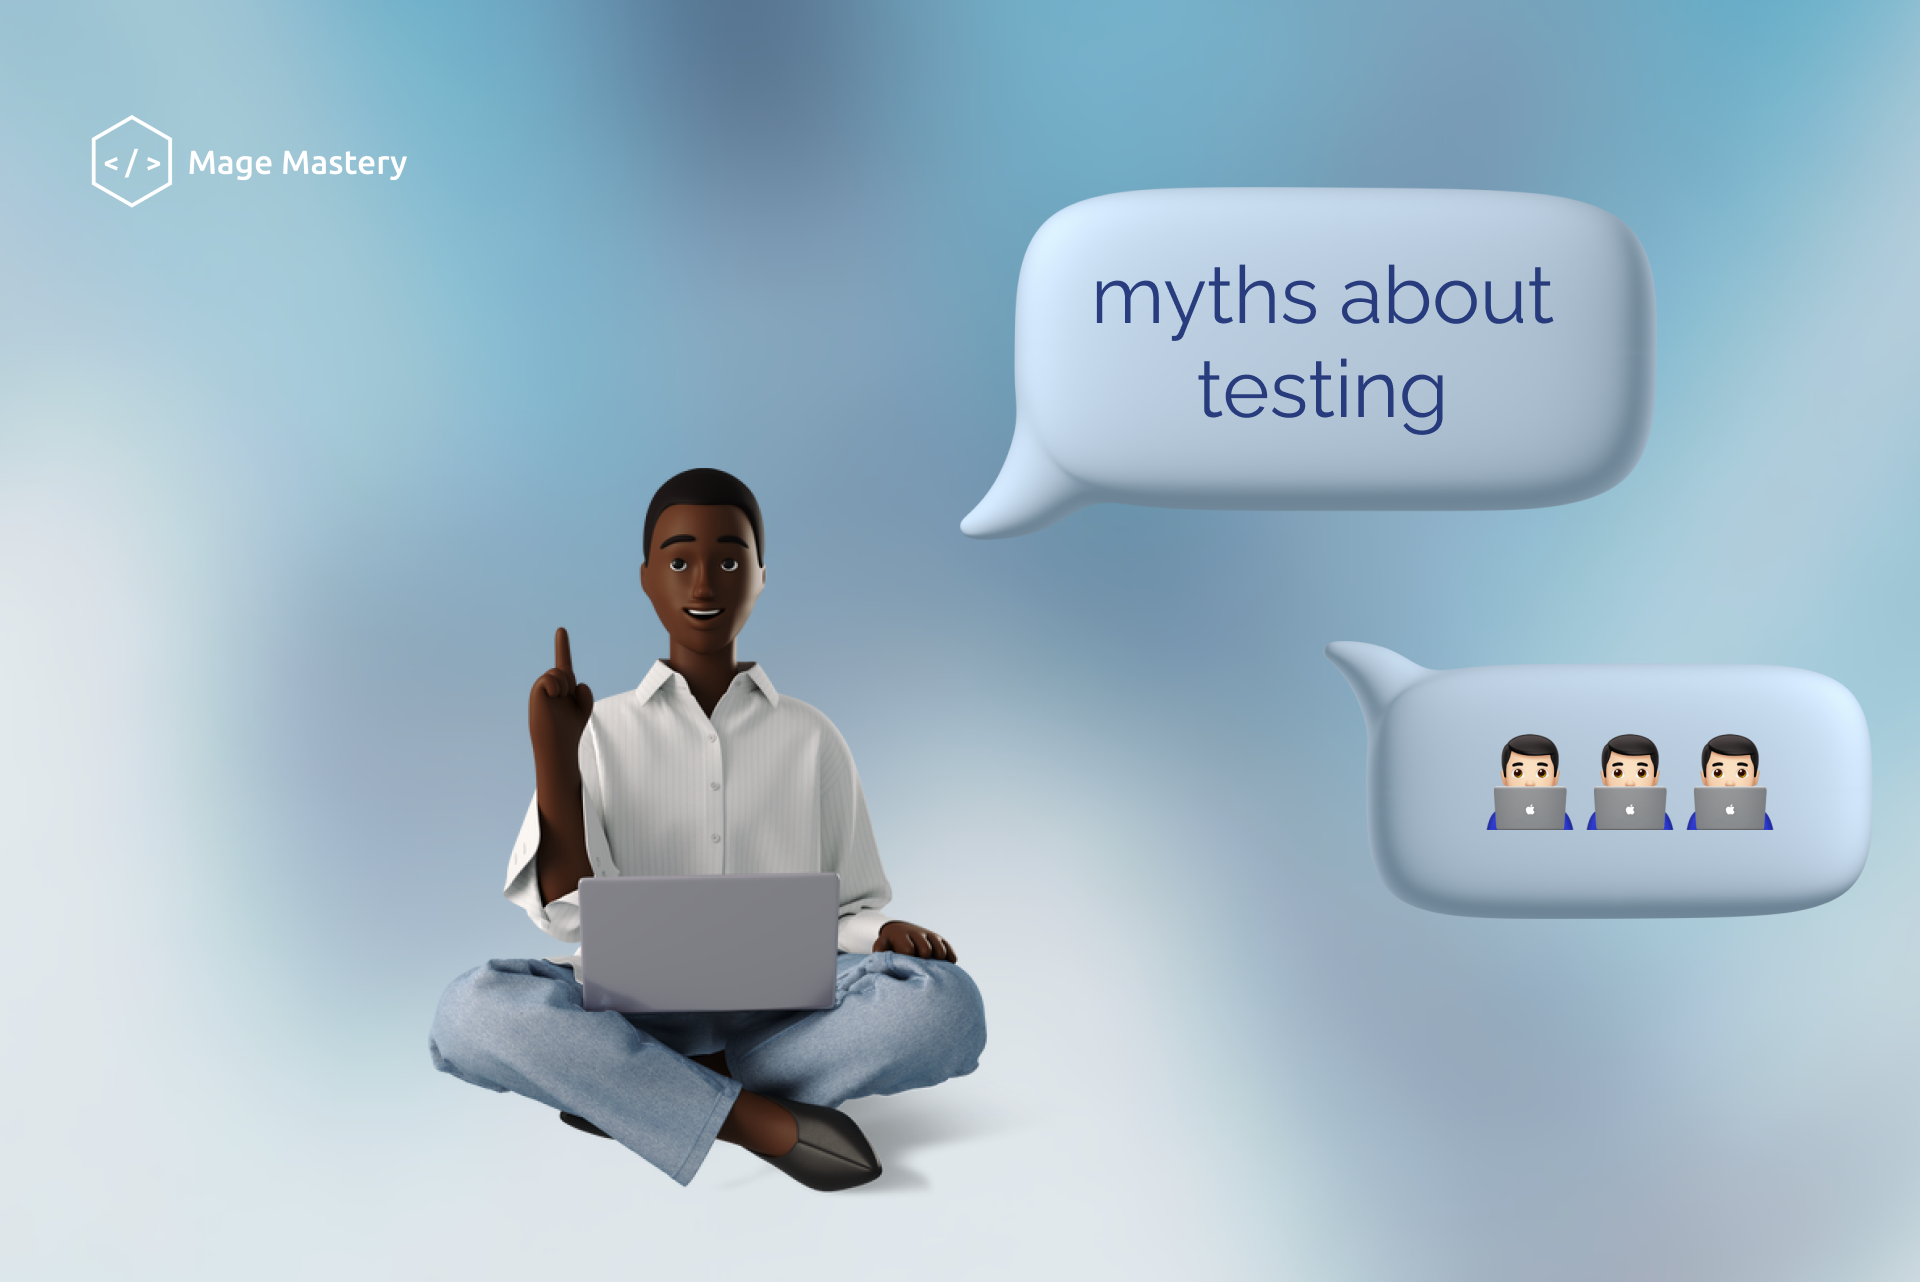 5 myths about testing